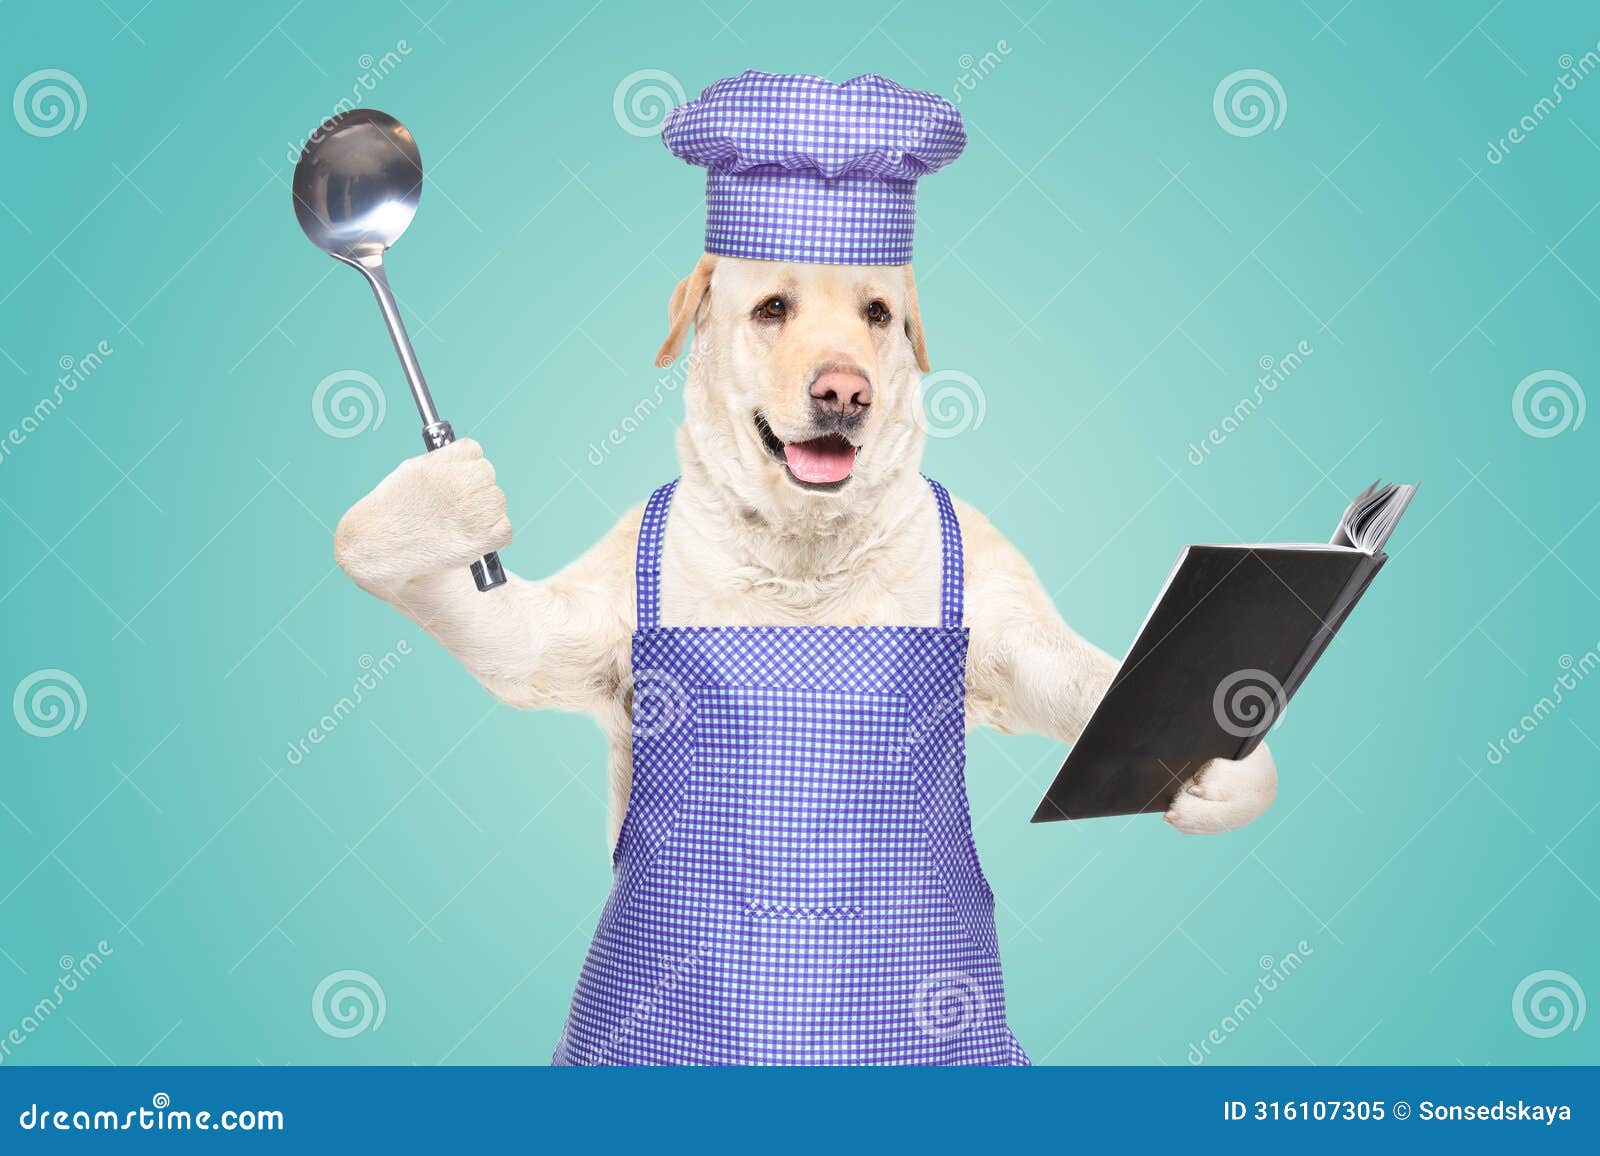 labrador in a chef's costume with a cookbook and a ladle in his hands